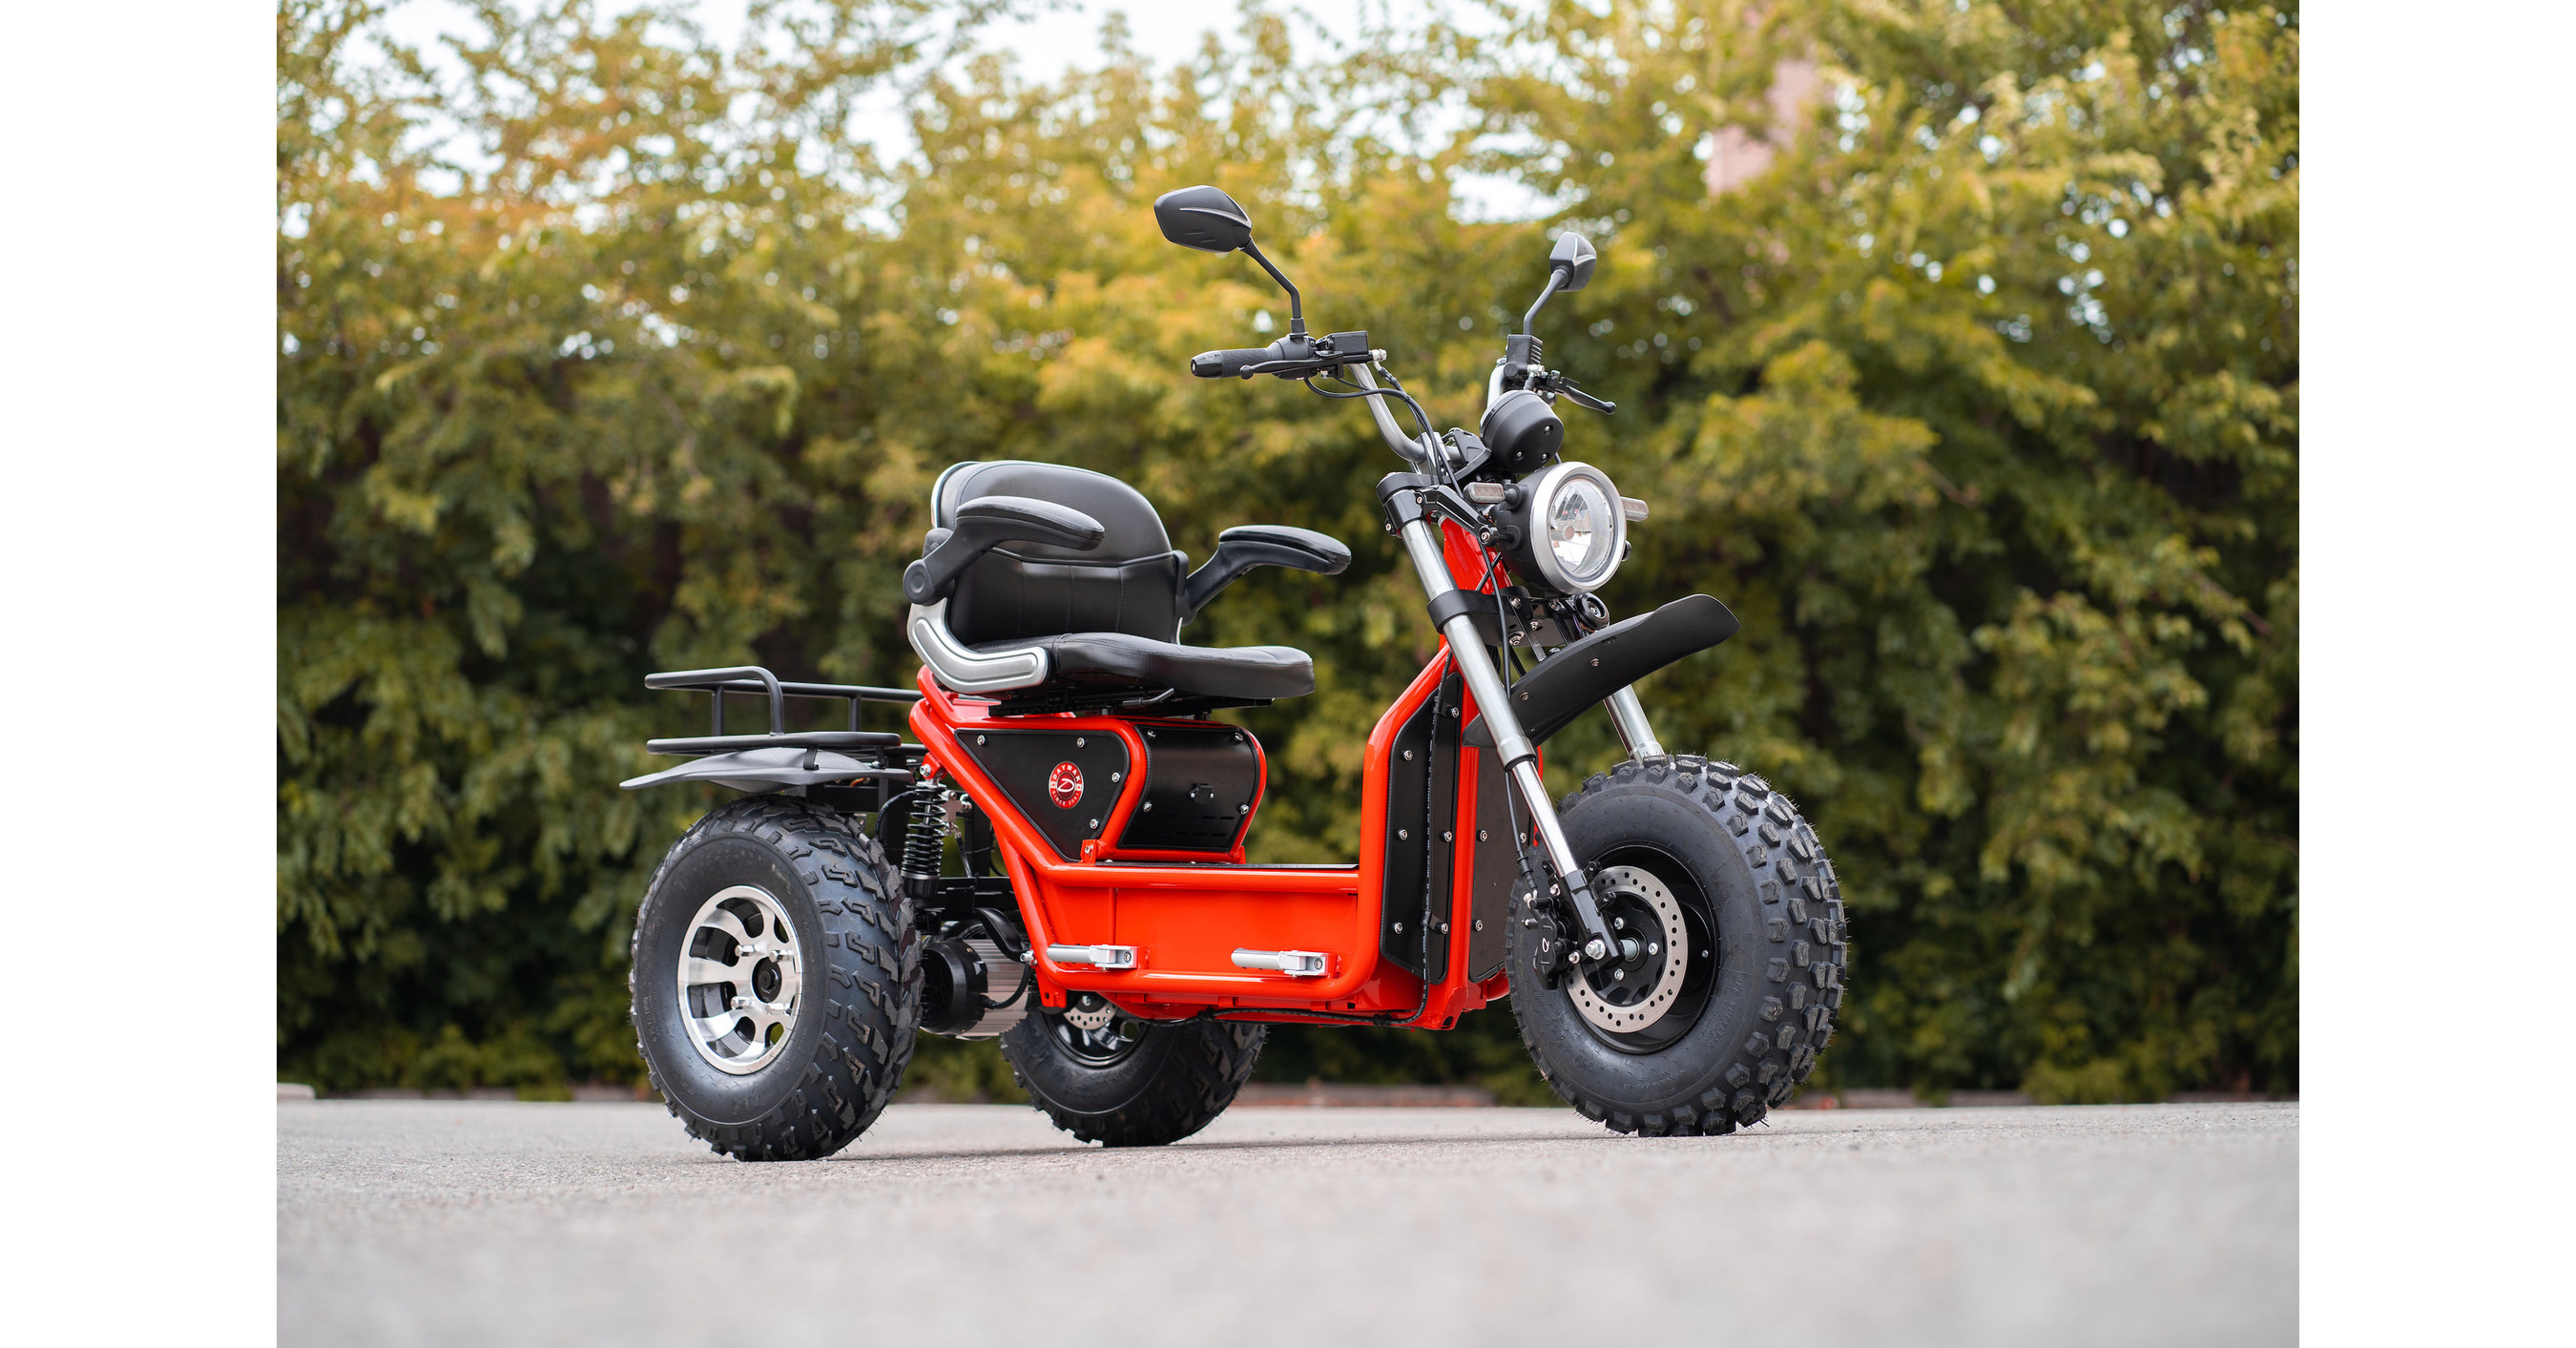 Daymak Launches New Boomerbeast 2 The First Mobility Scooter That Recharge In Just Minutes With Lithium Titanate Battery